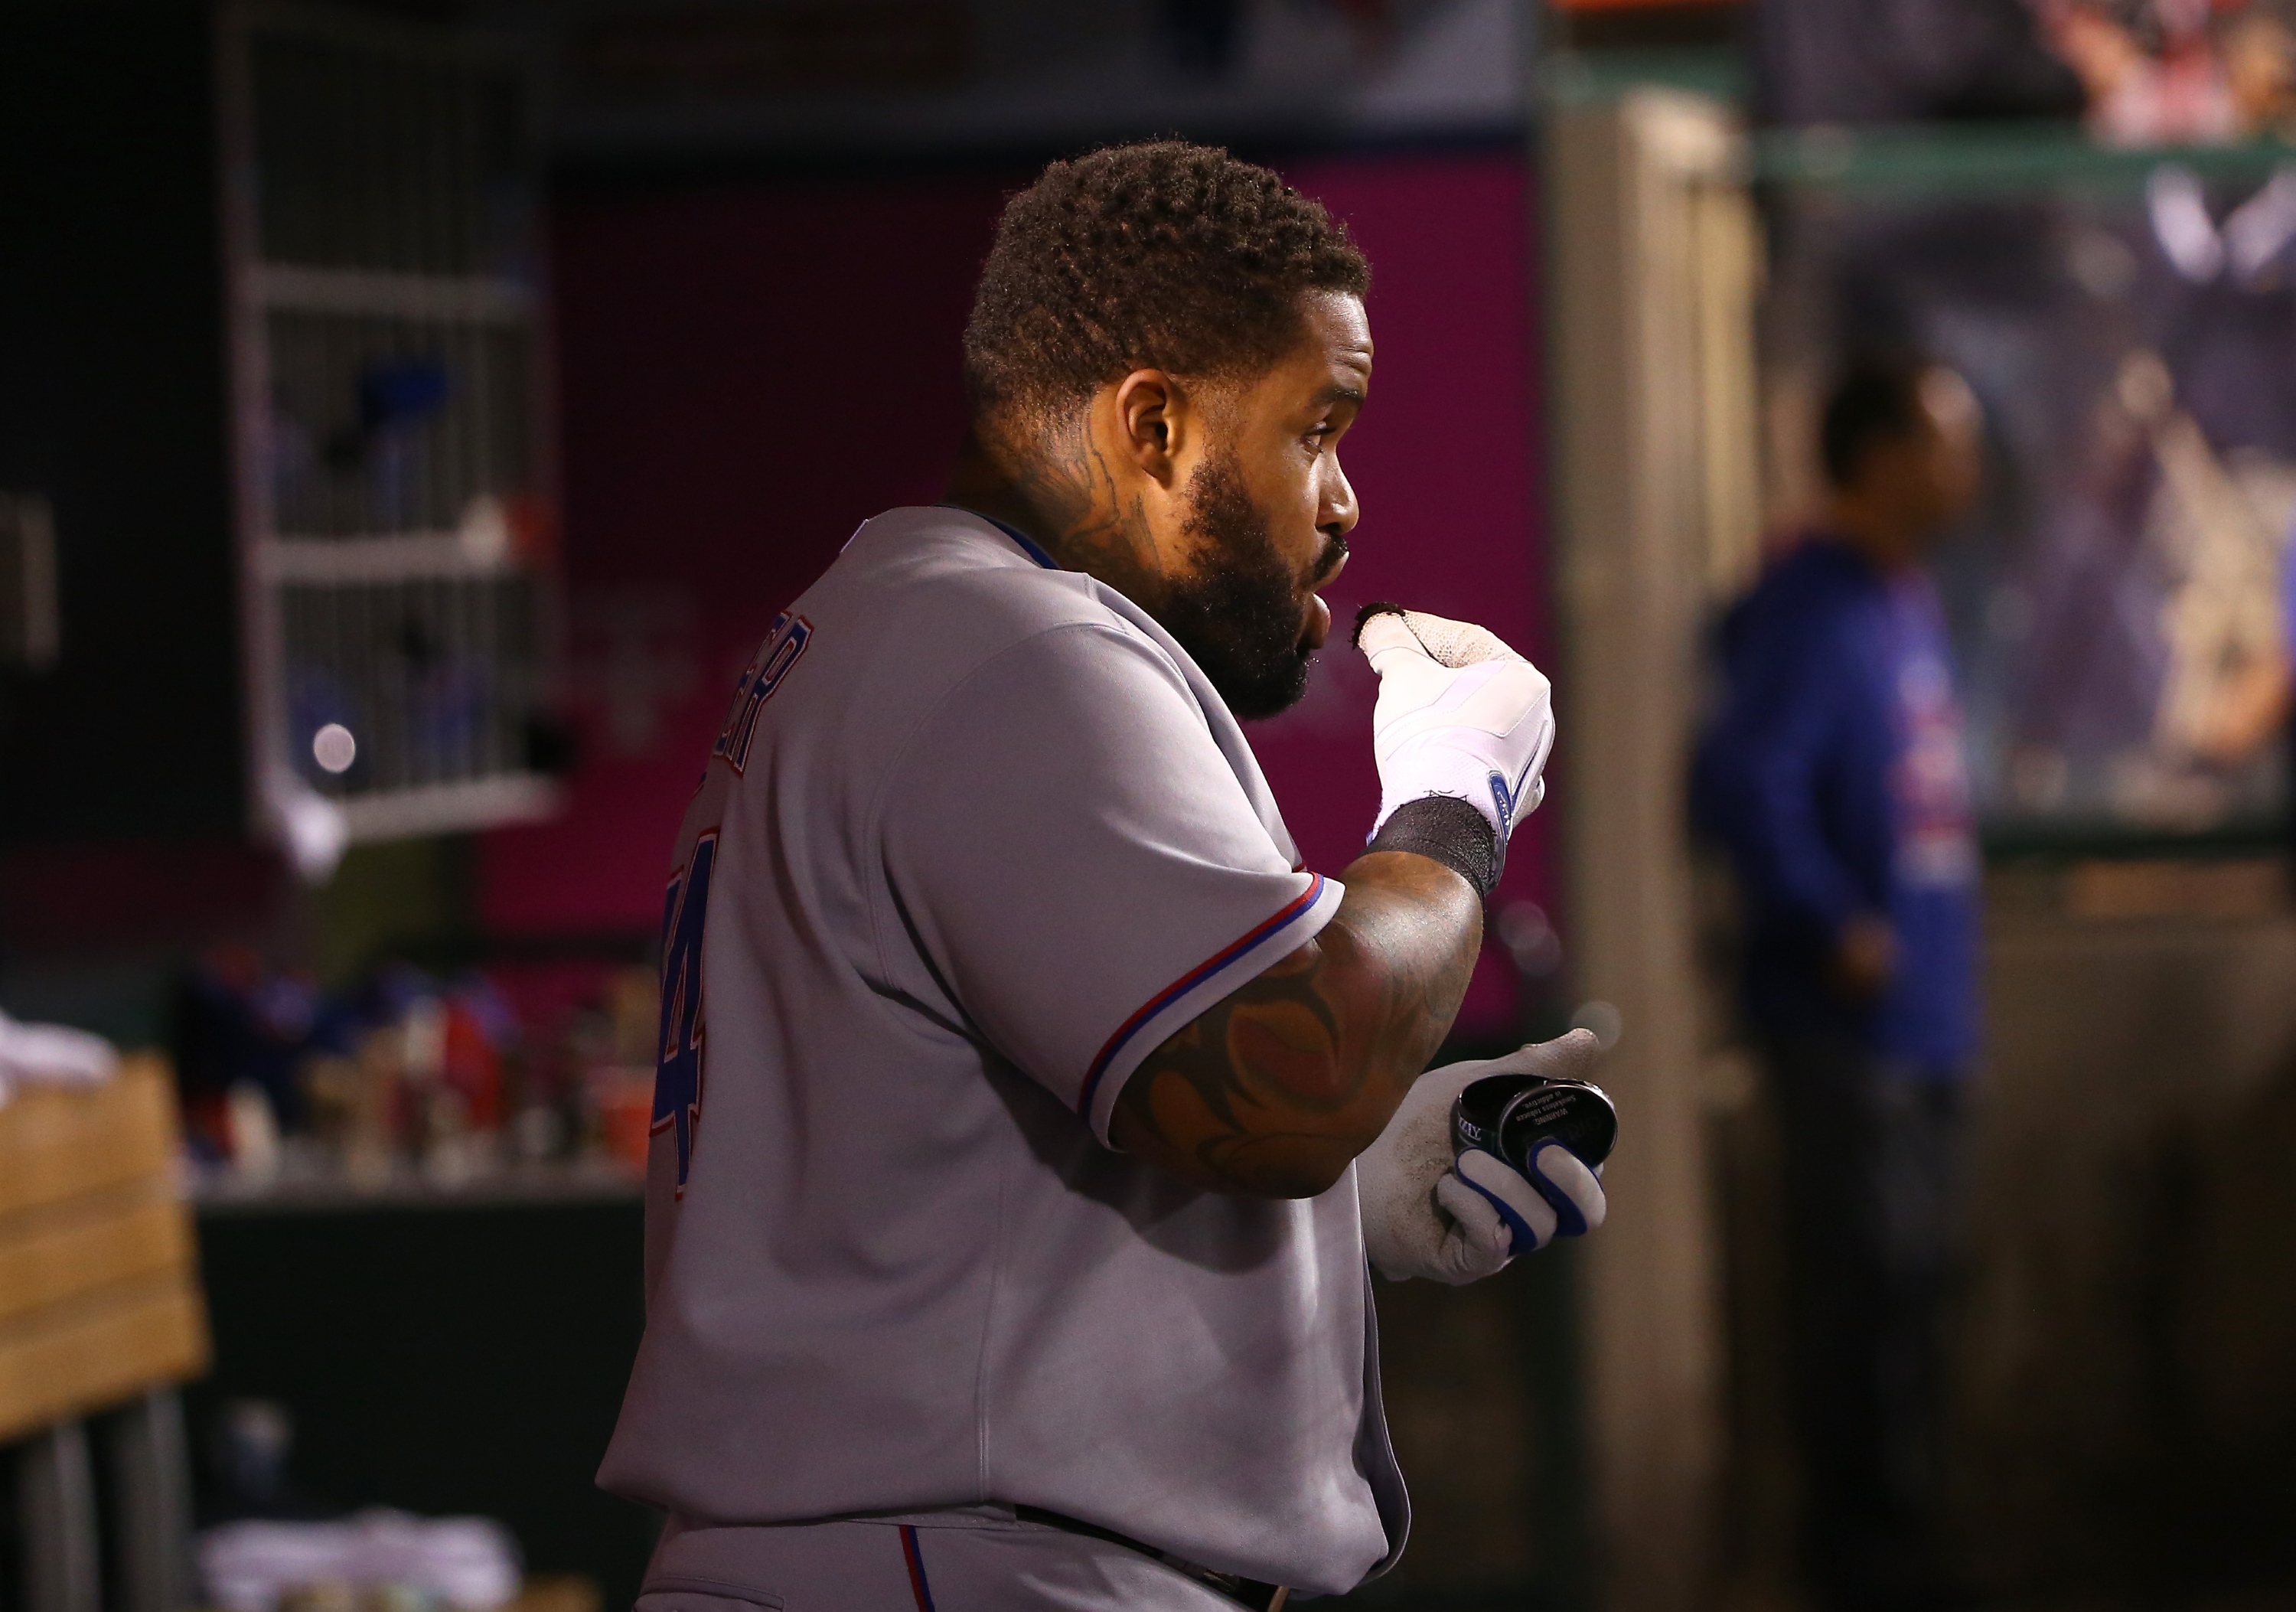 Prince Fielder getting some chewing tobacco. (Getty Images)